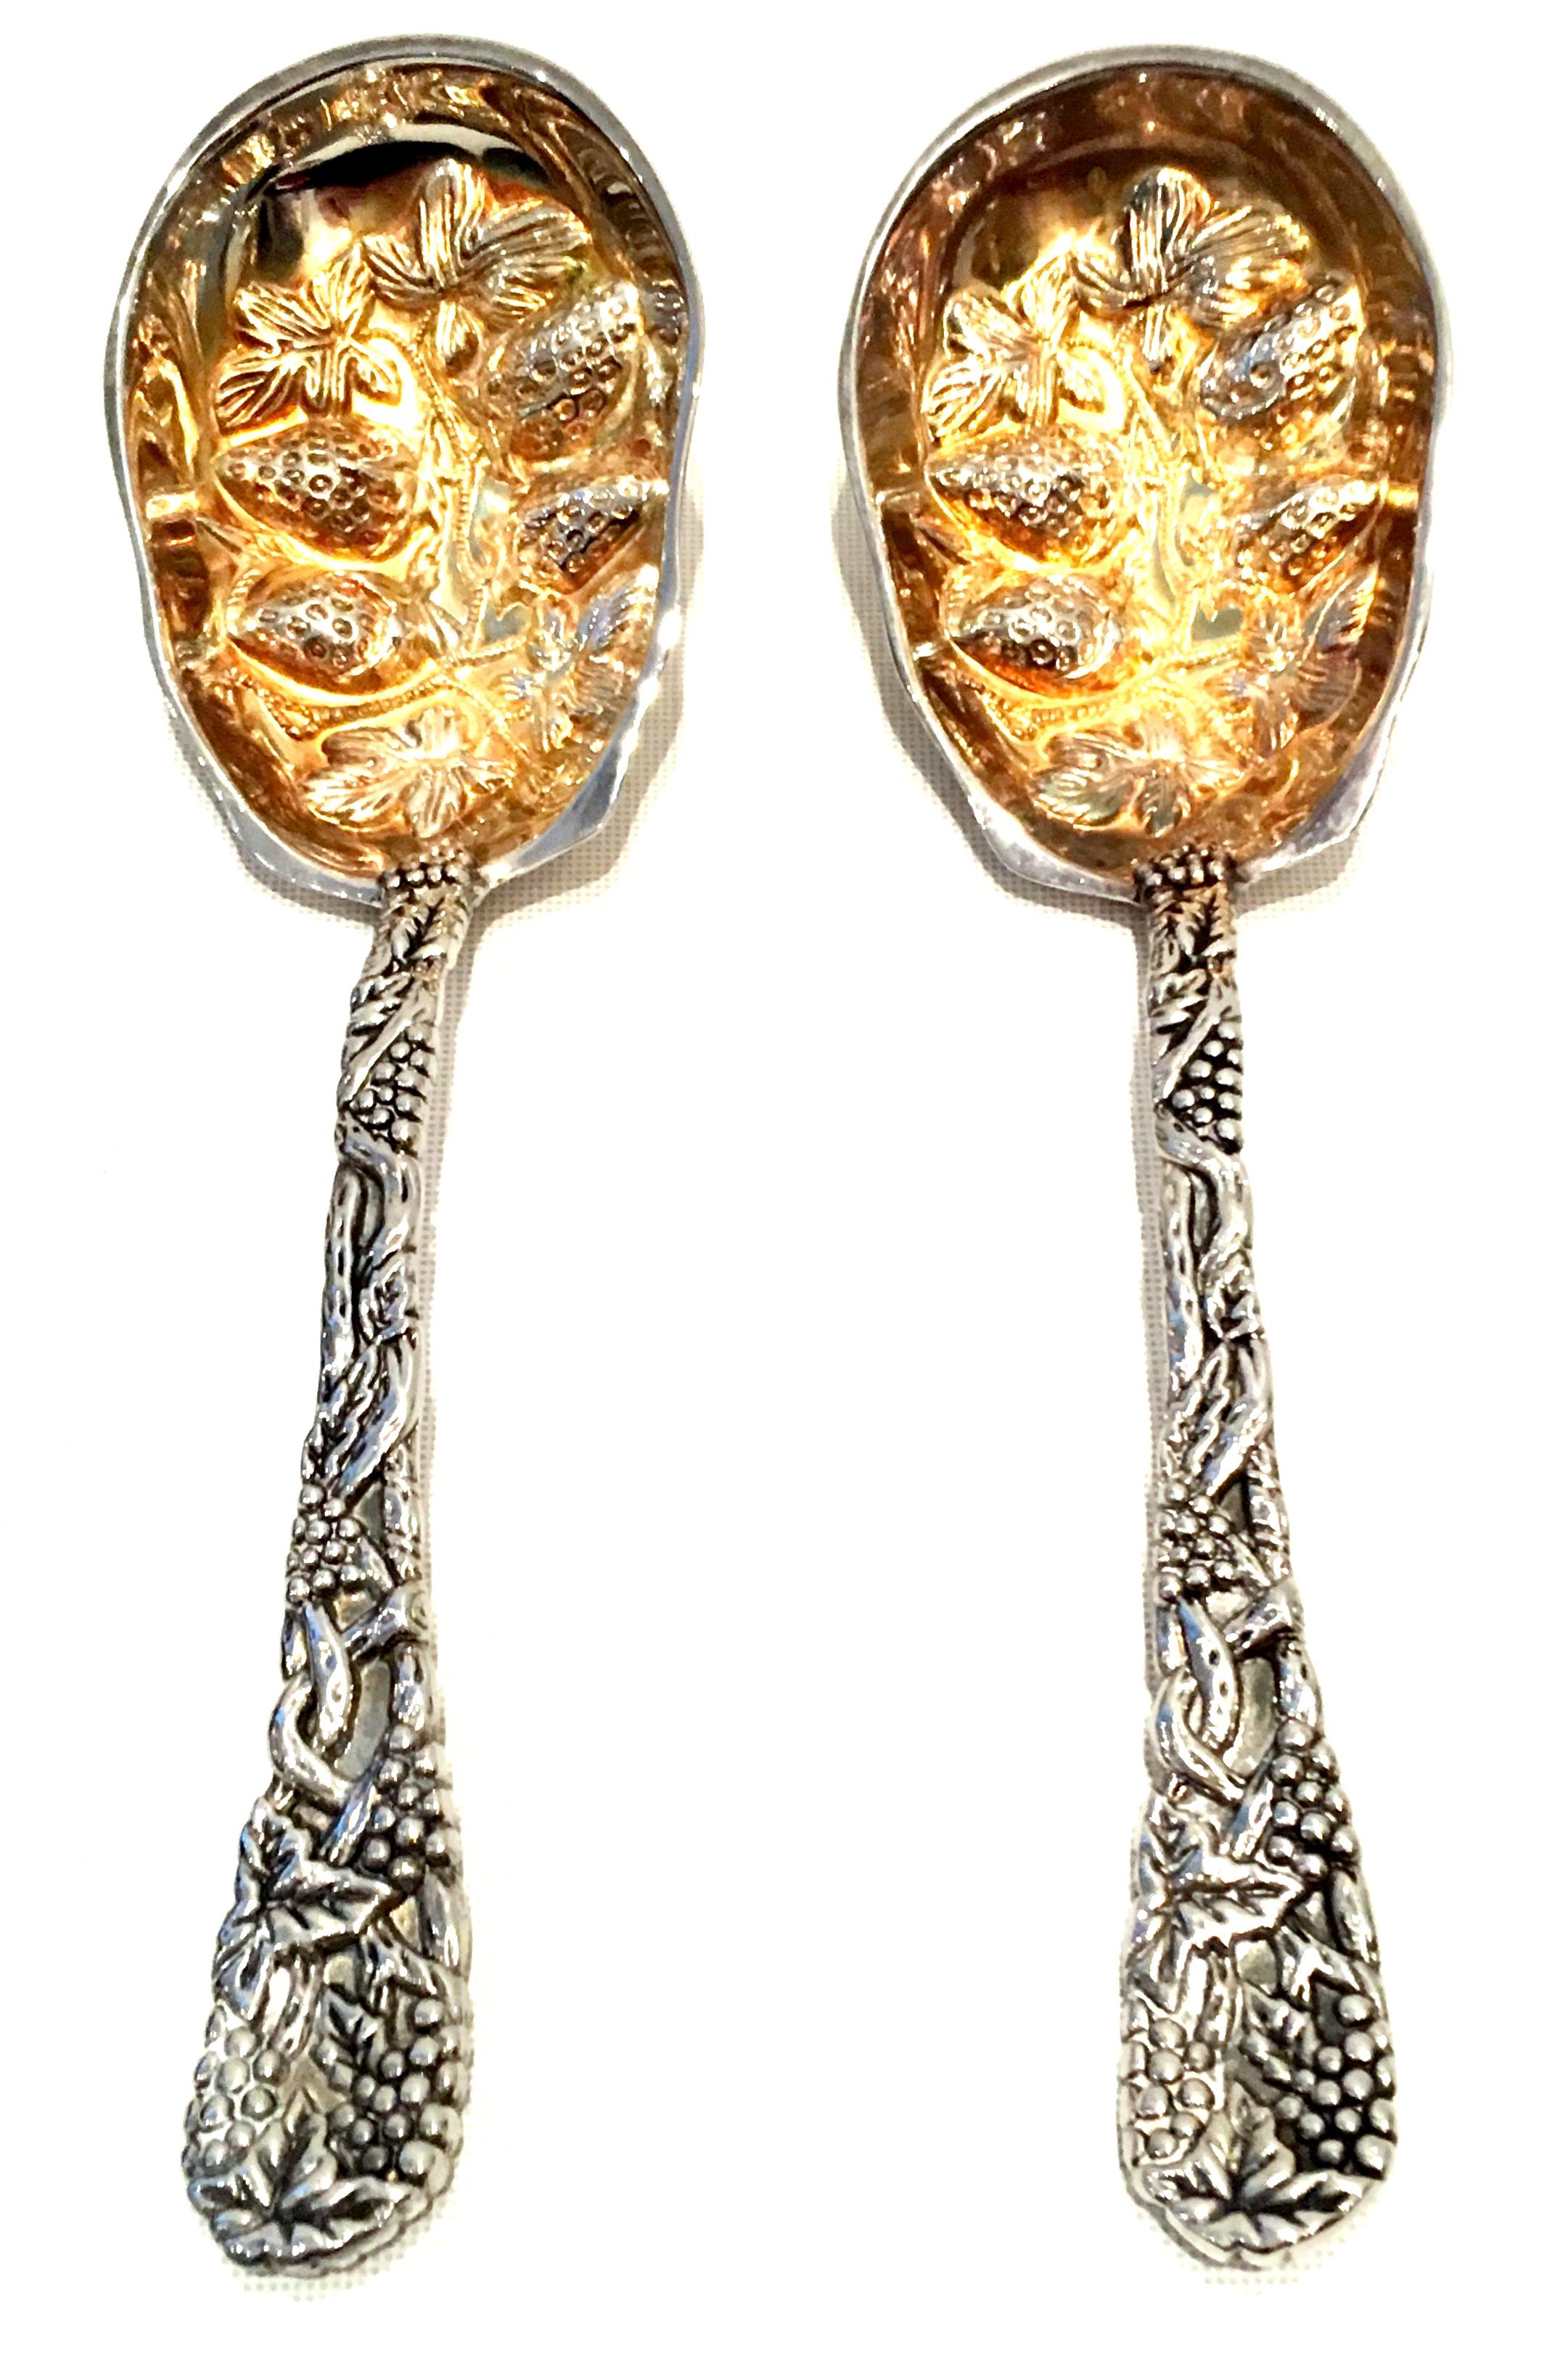 20th Century Pair Of Godinger For Neiman Marcus Silver Plate Serving Spoons S/2. Includes the original green velvet Neiman Marcus logo gift box and care card. New or like new. 
Each piece is signed, Godinger.
The gold tone patina can be polished